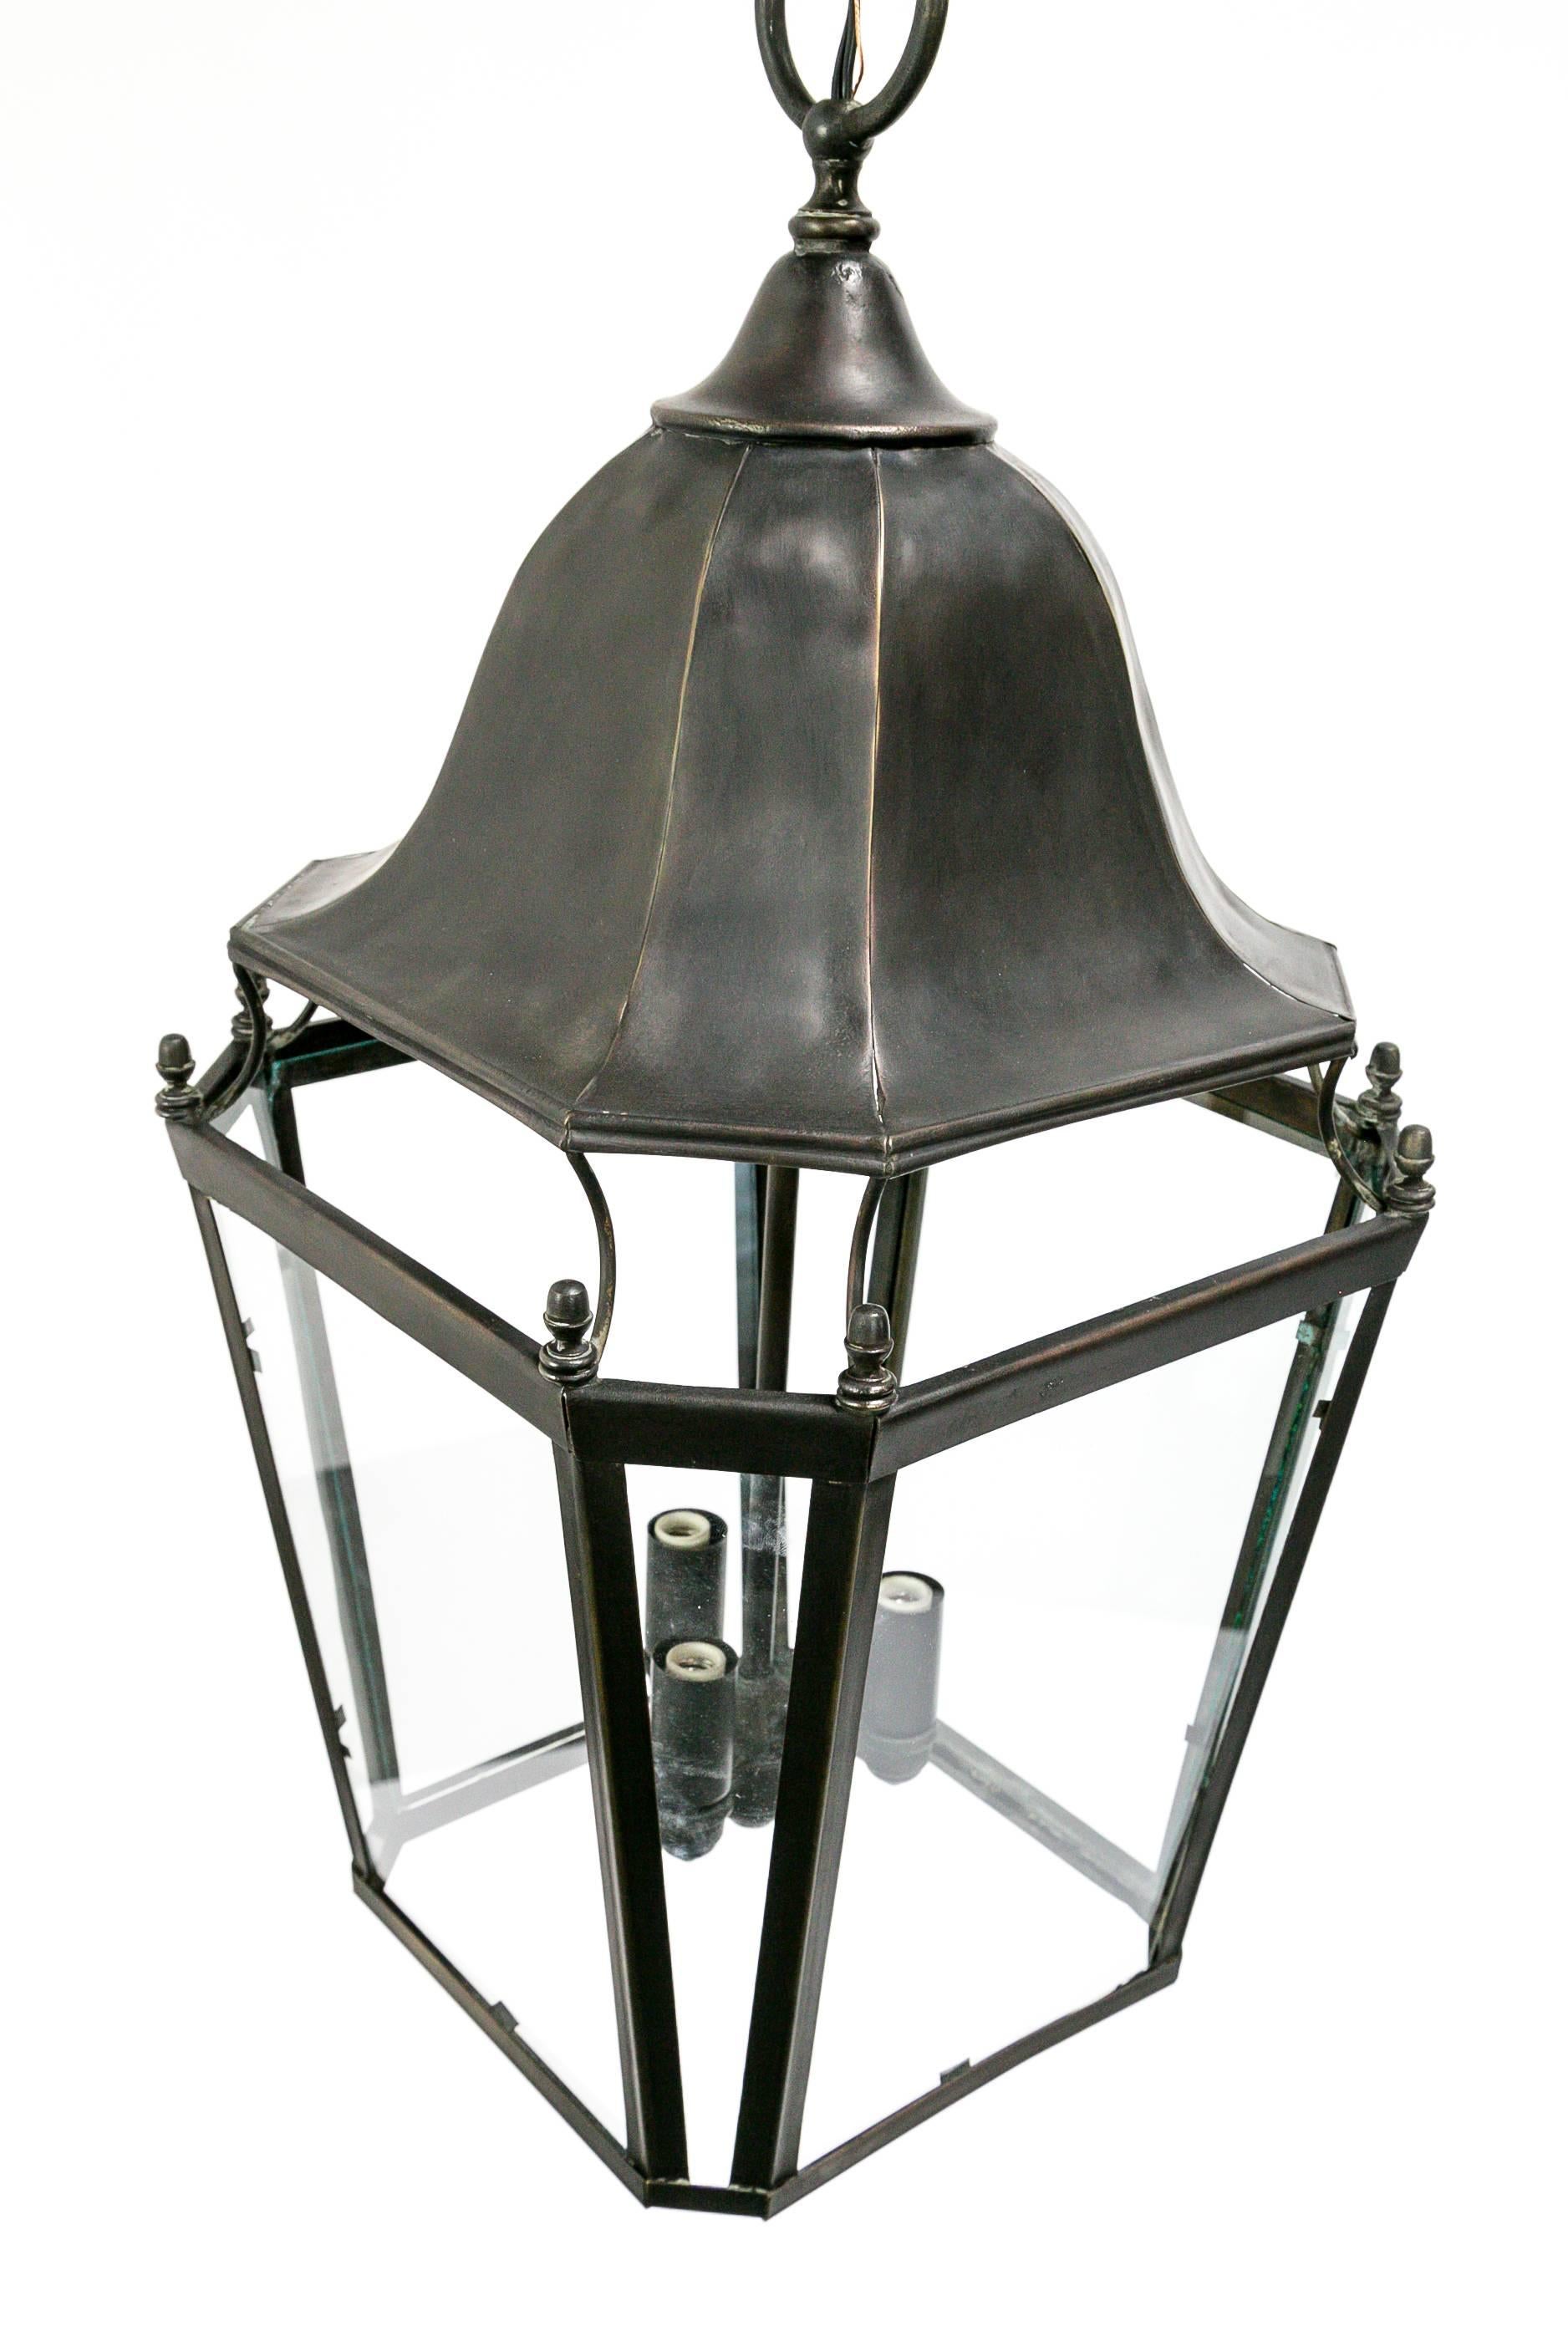 British Colonial Colonial Style Eight-Sided Lantern